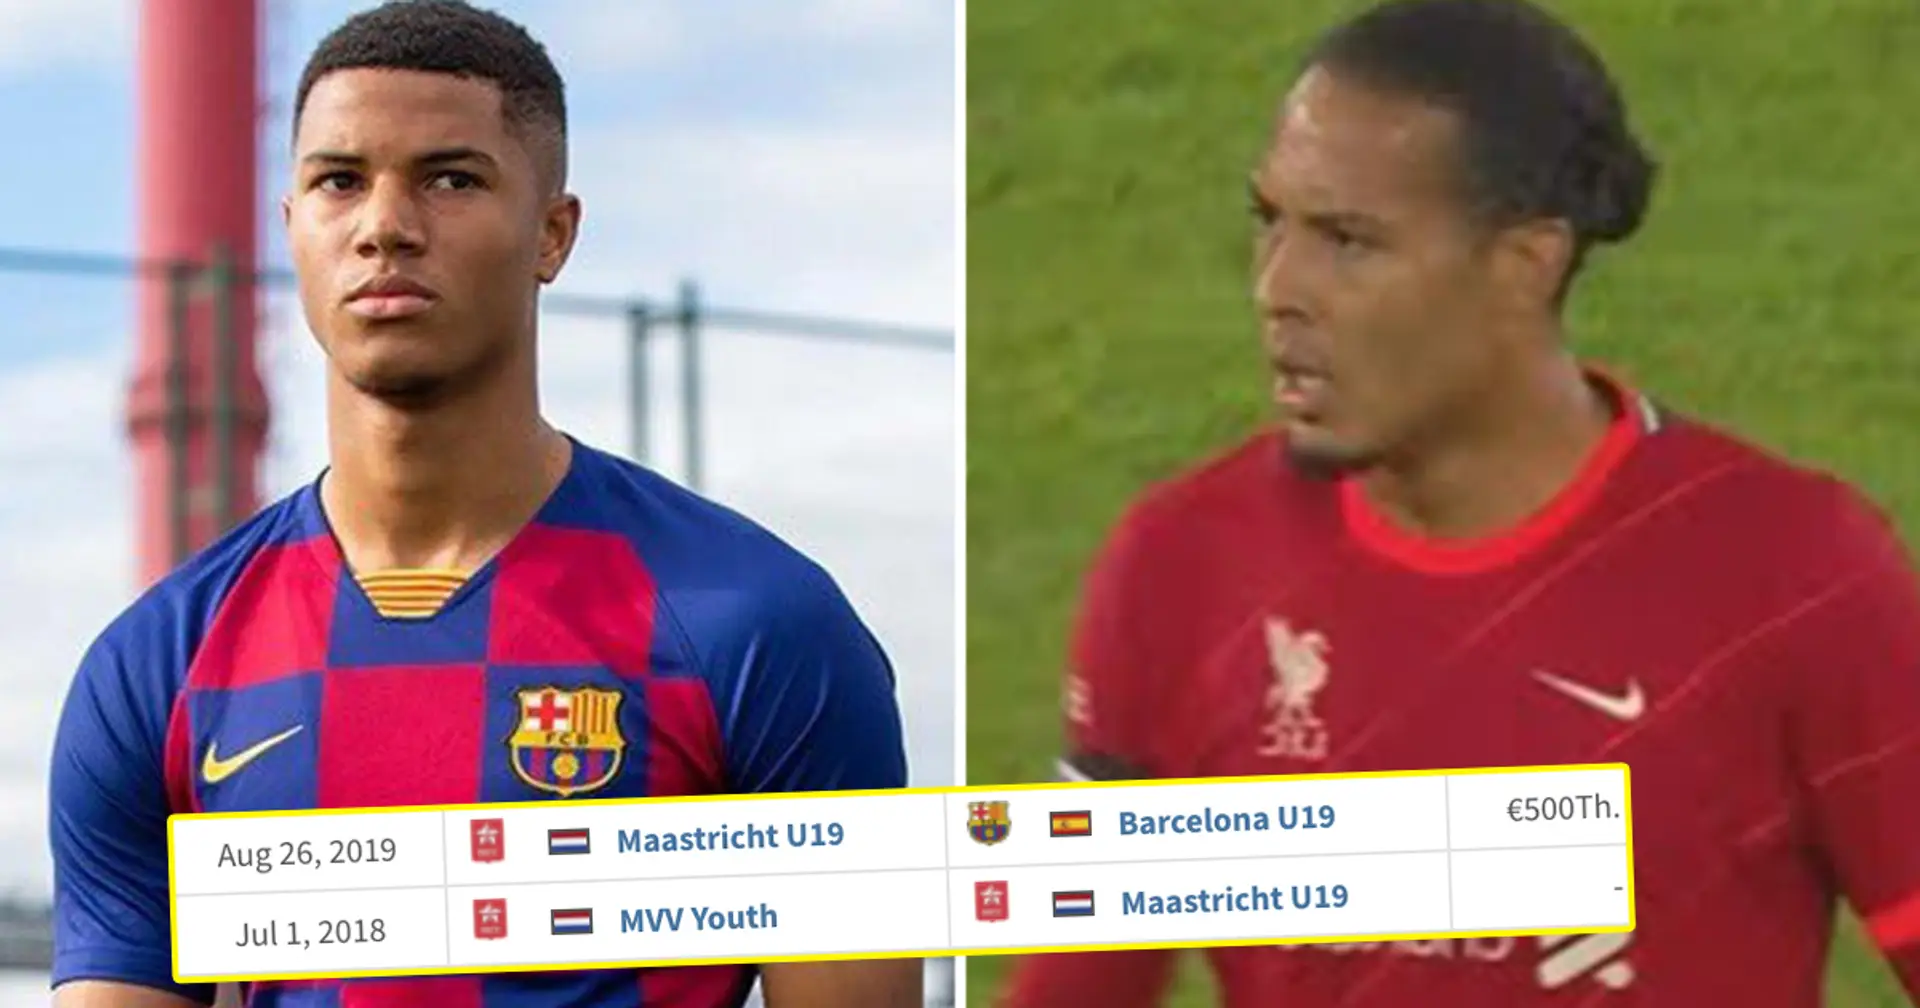 What's happened to Barca's 'new Van Dijk' Xavier Mbuyamba? You asked, we answered